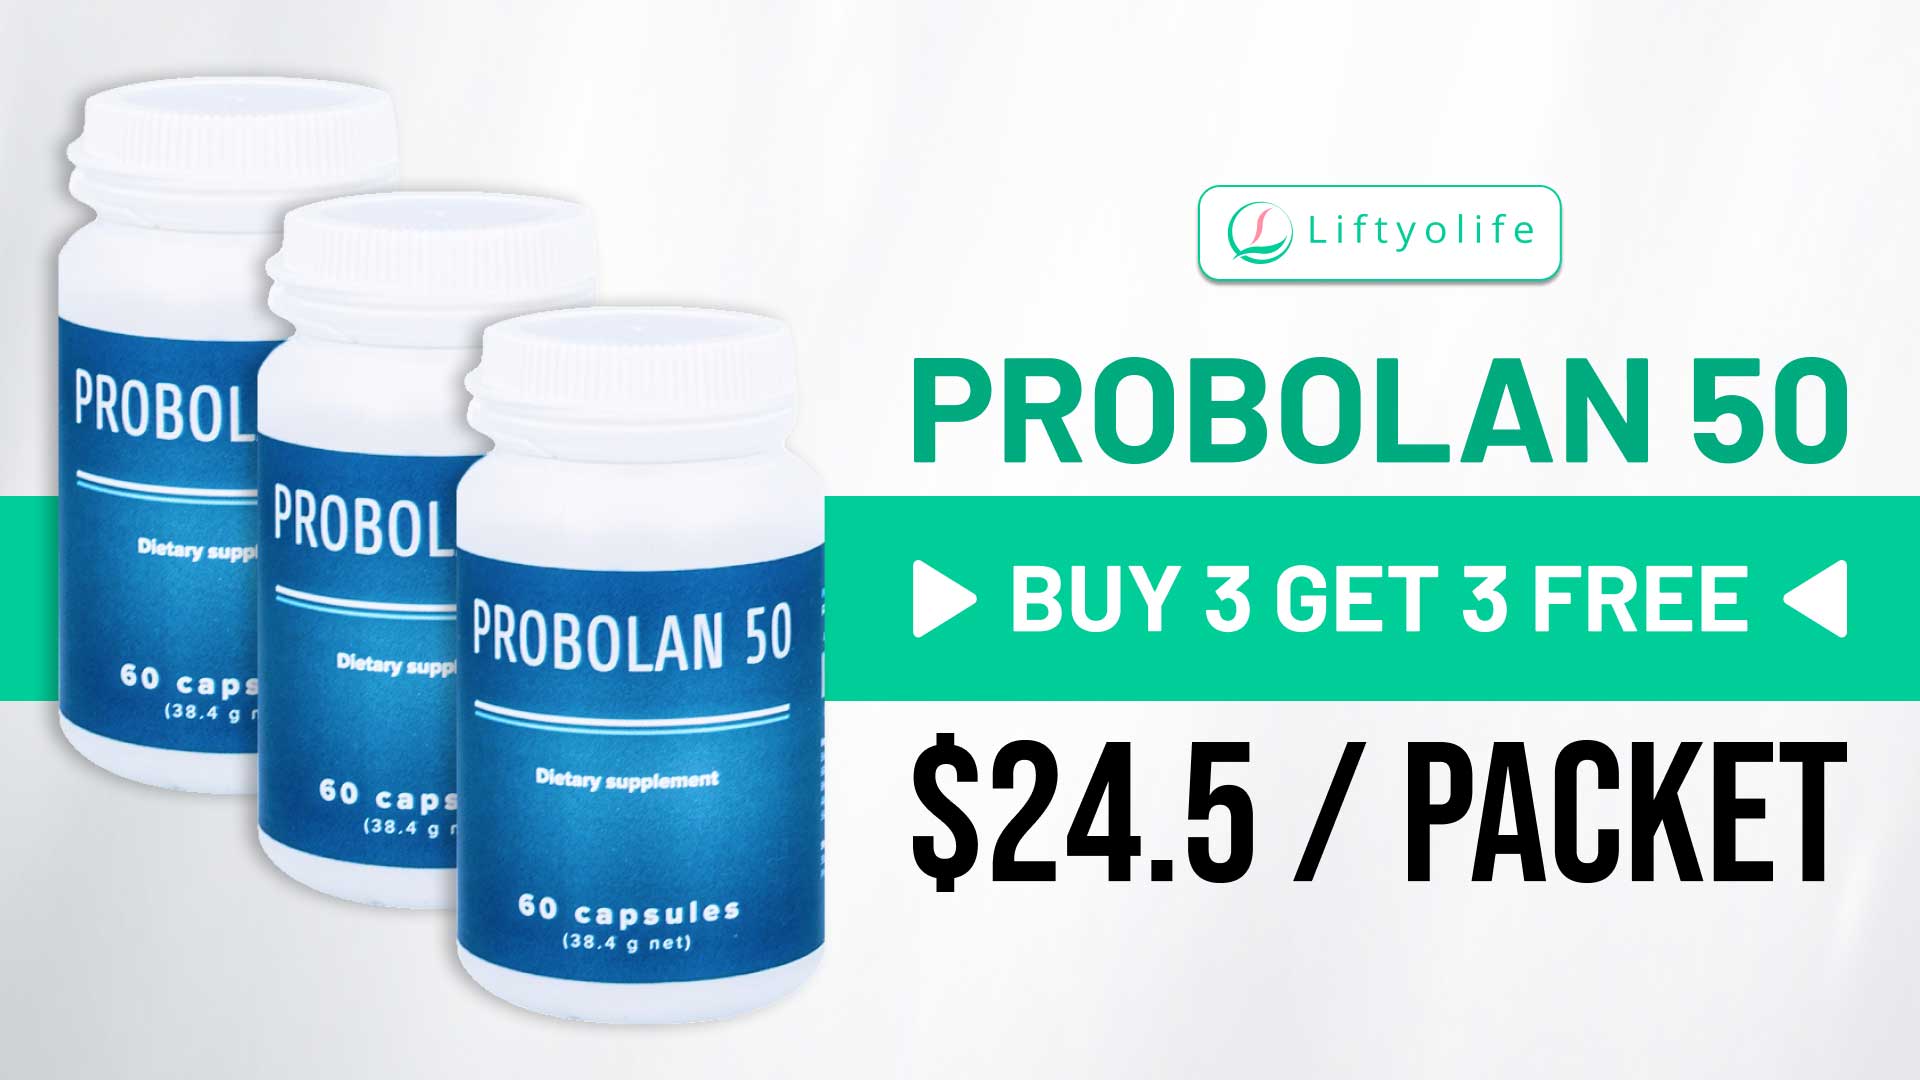 Probolan 50: Price And Where To Buy